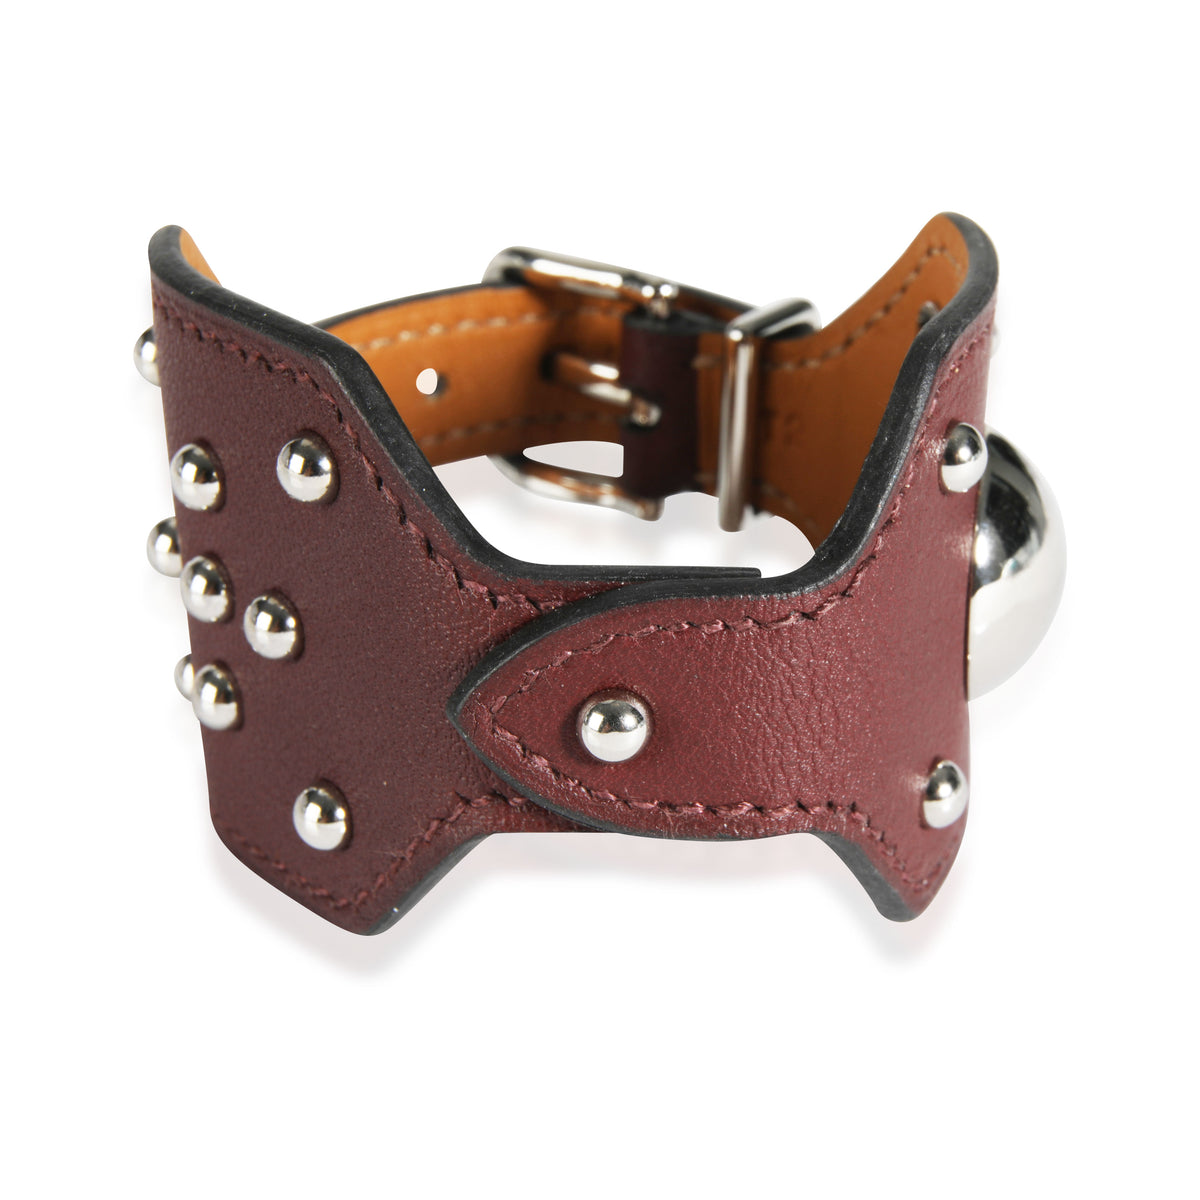 Carnaby Leather Bracelet with Palladium Plated Buckle Closure